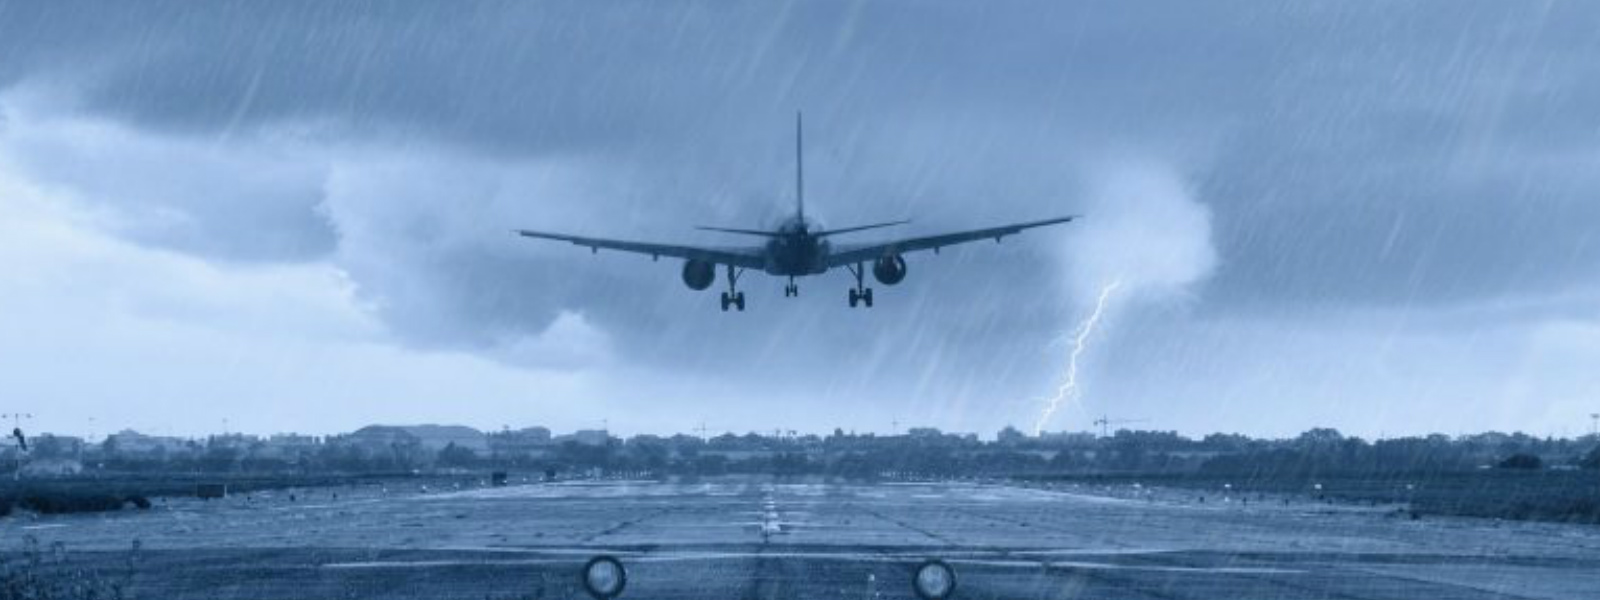 Plane lands 3 hours late due to bad weather